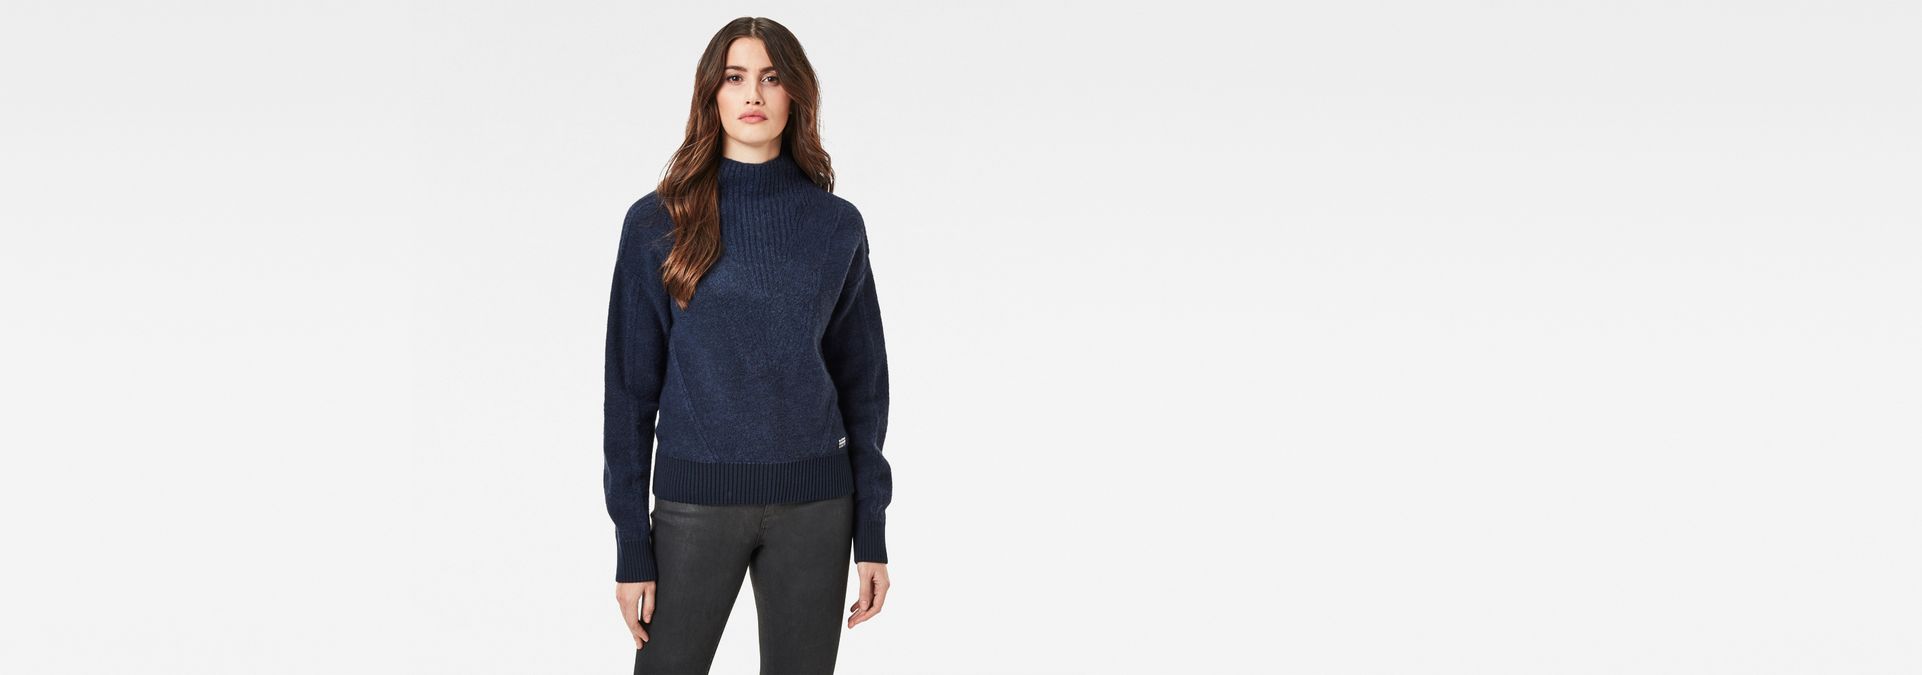 G-STAR RAW Utility Cable Mock su/éter para Mujer